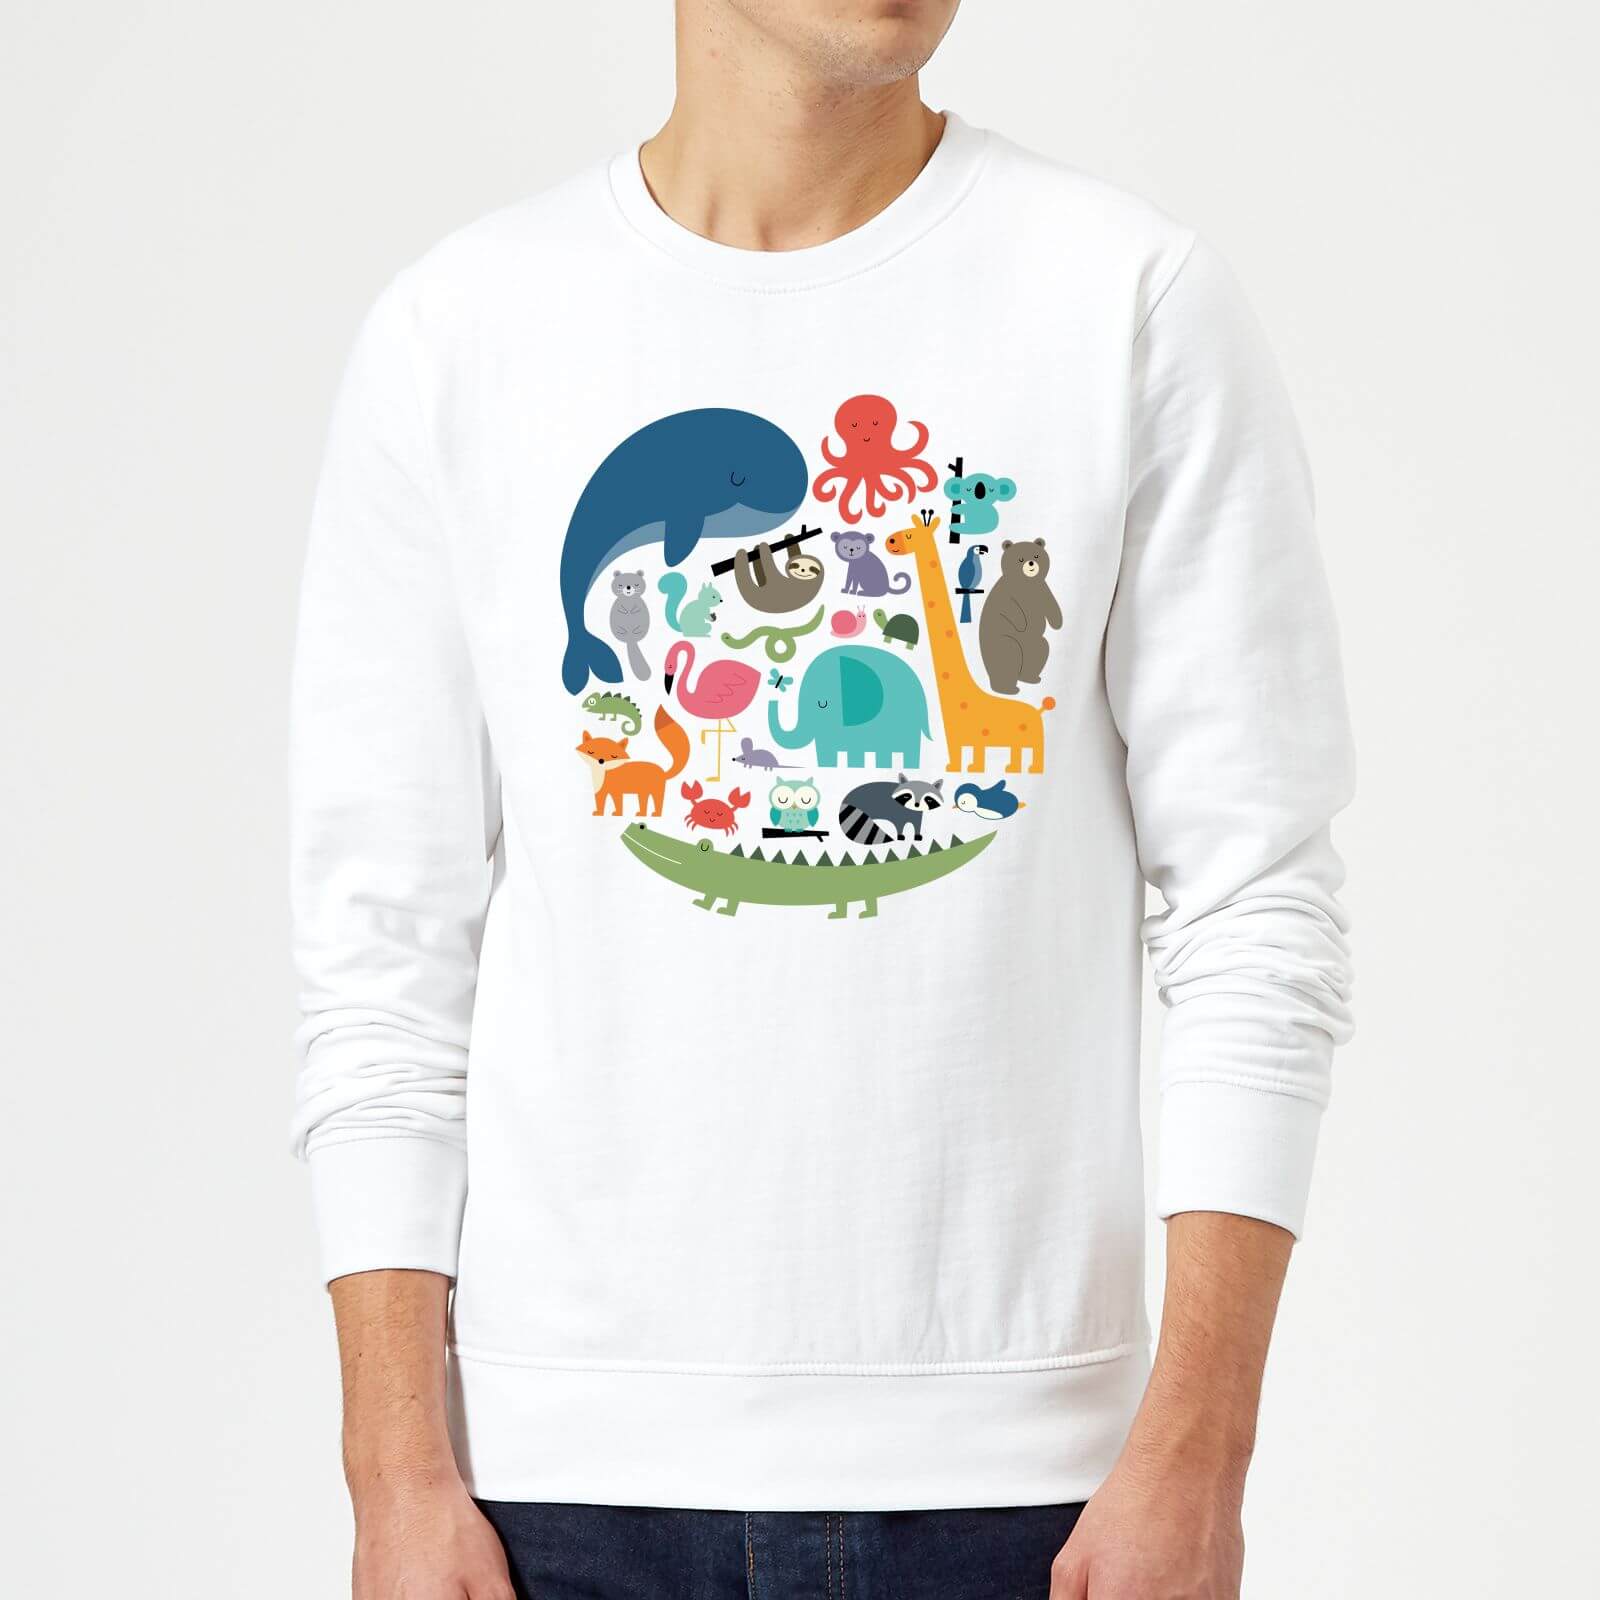 Andy Westface We Are One Sweatshirt - White - S - White